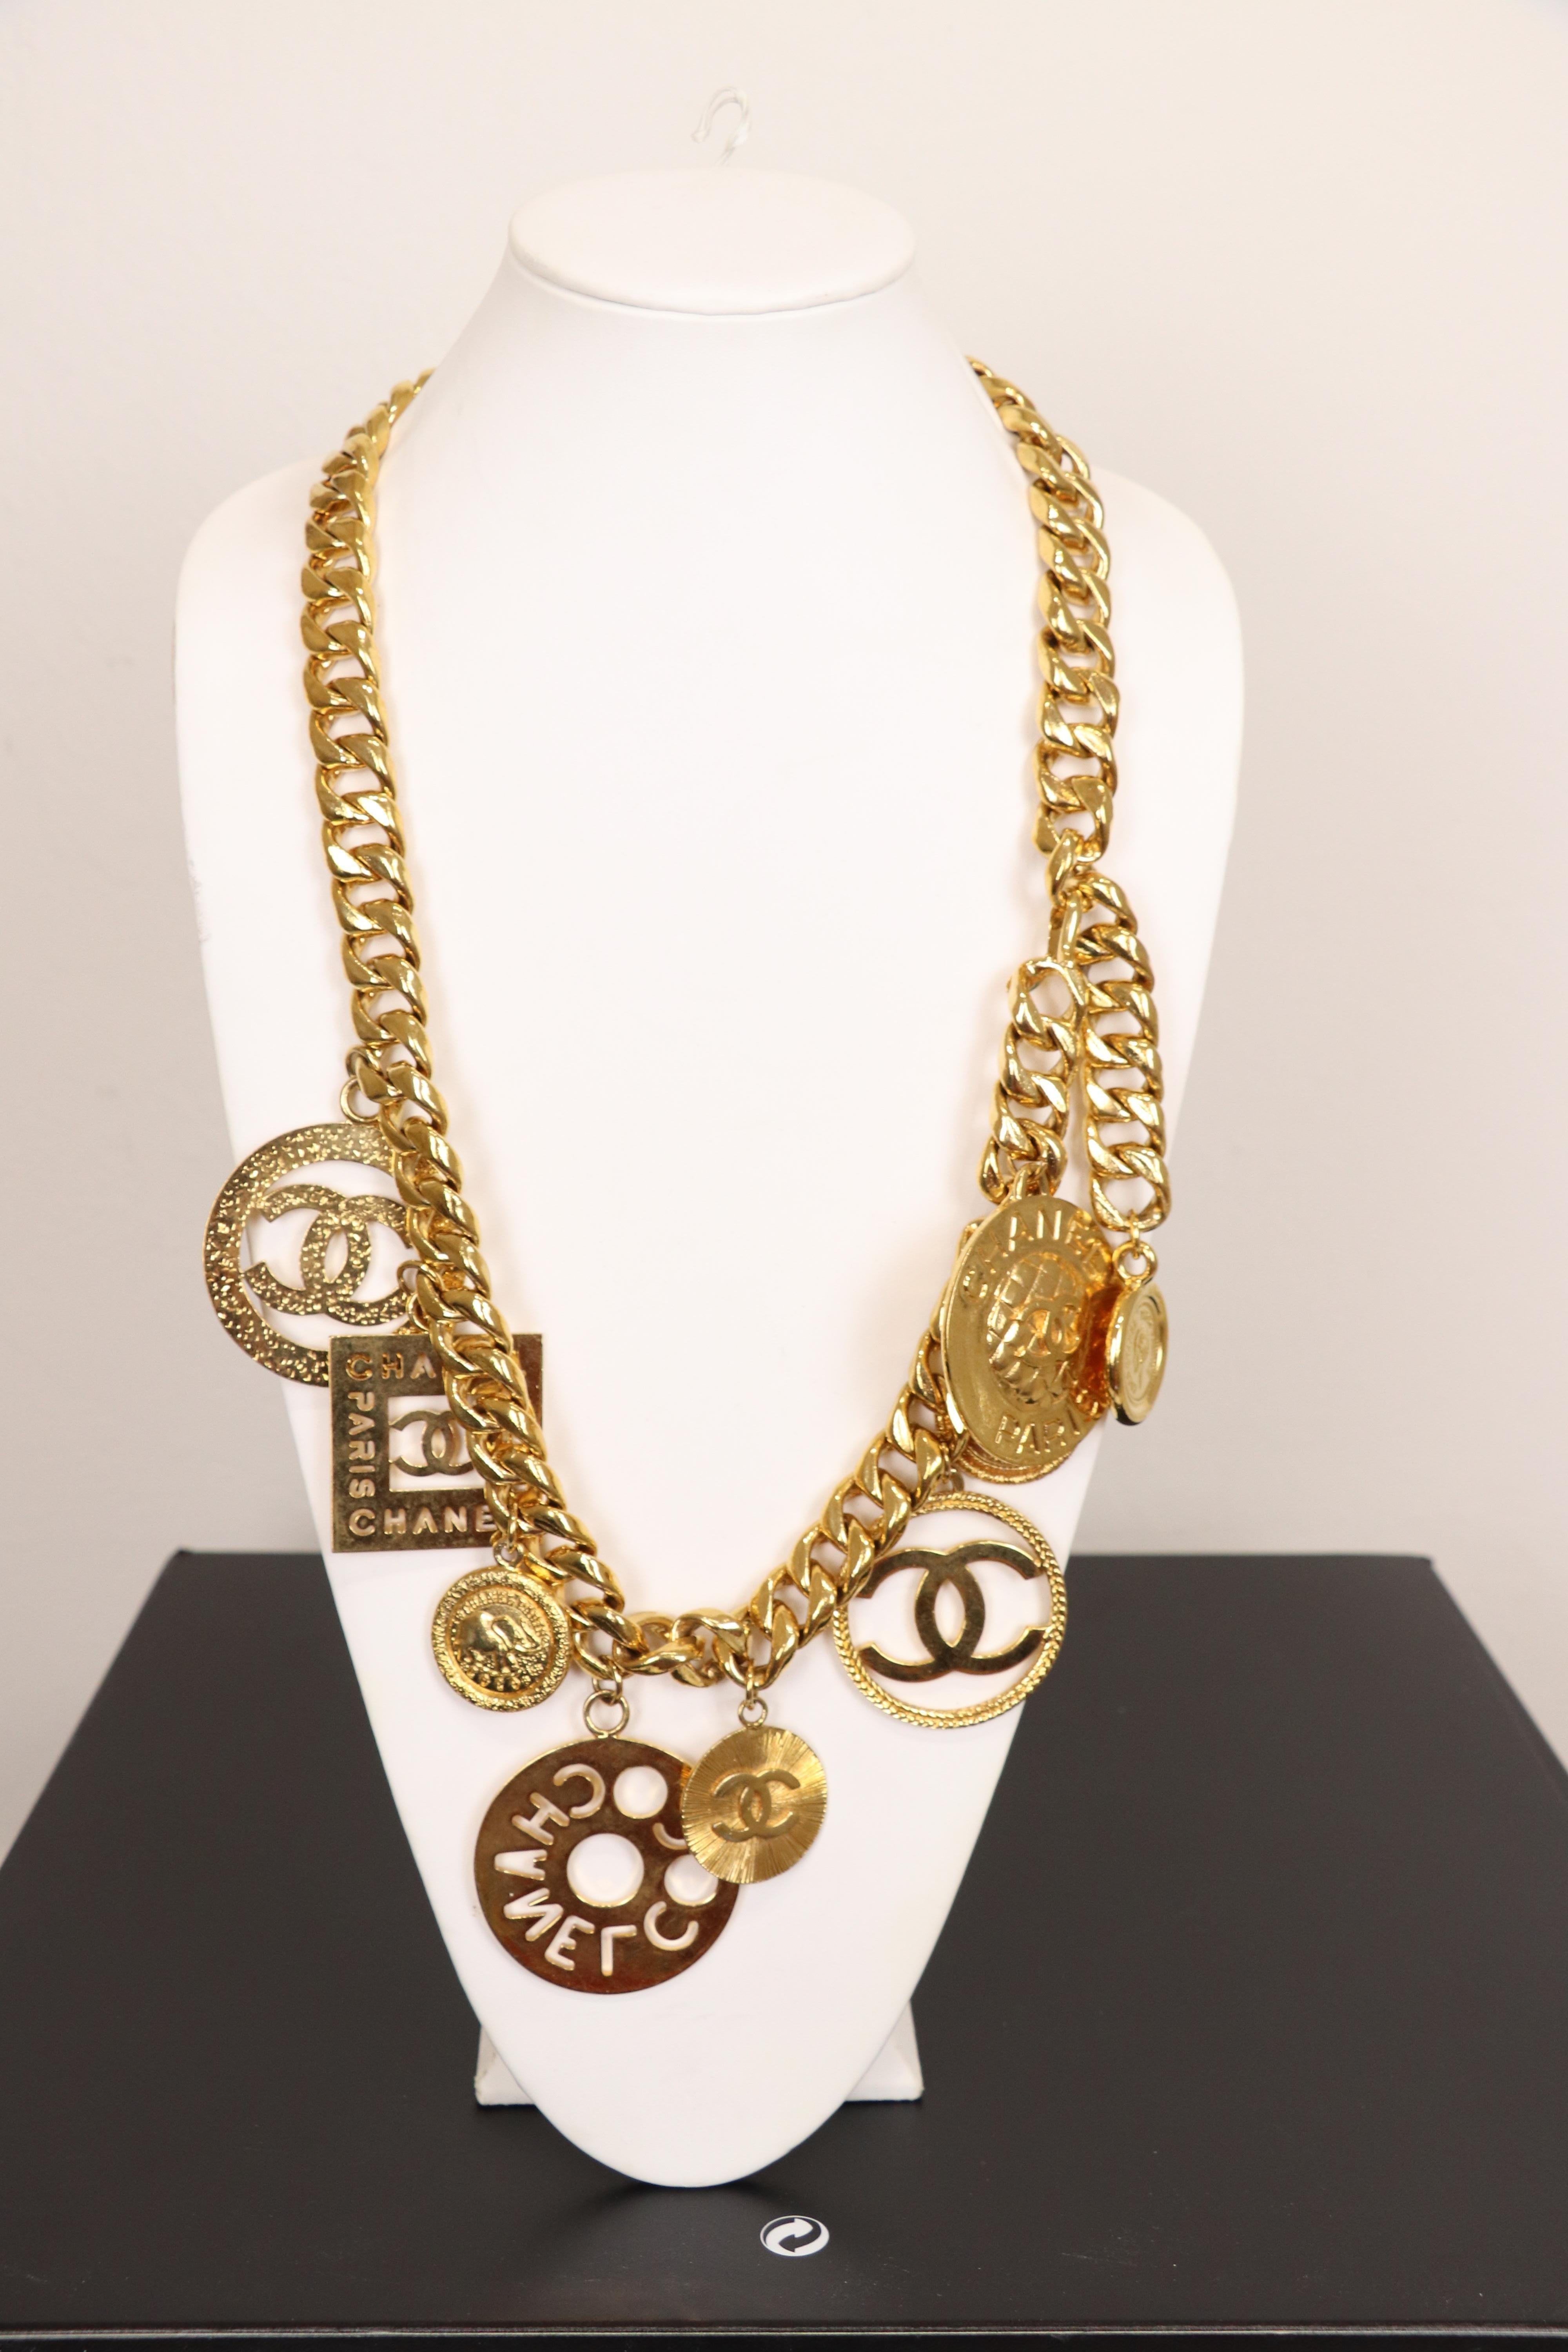 chanel paperclip necklace